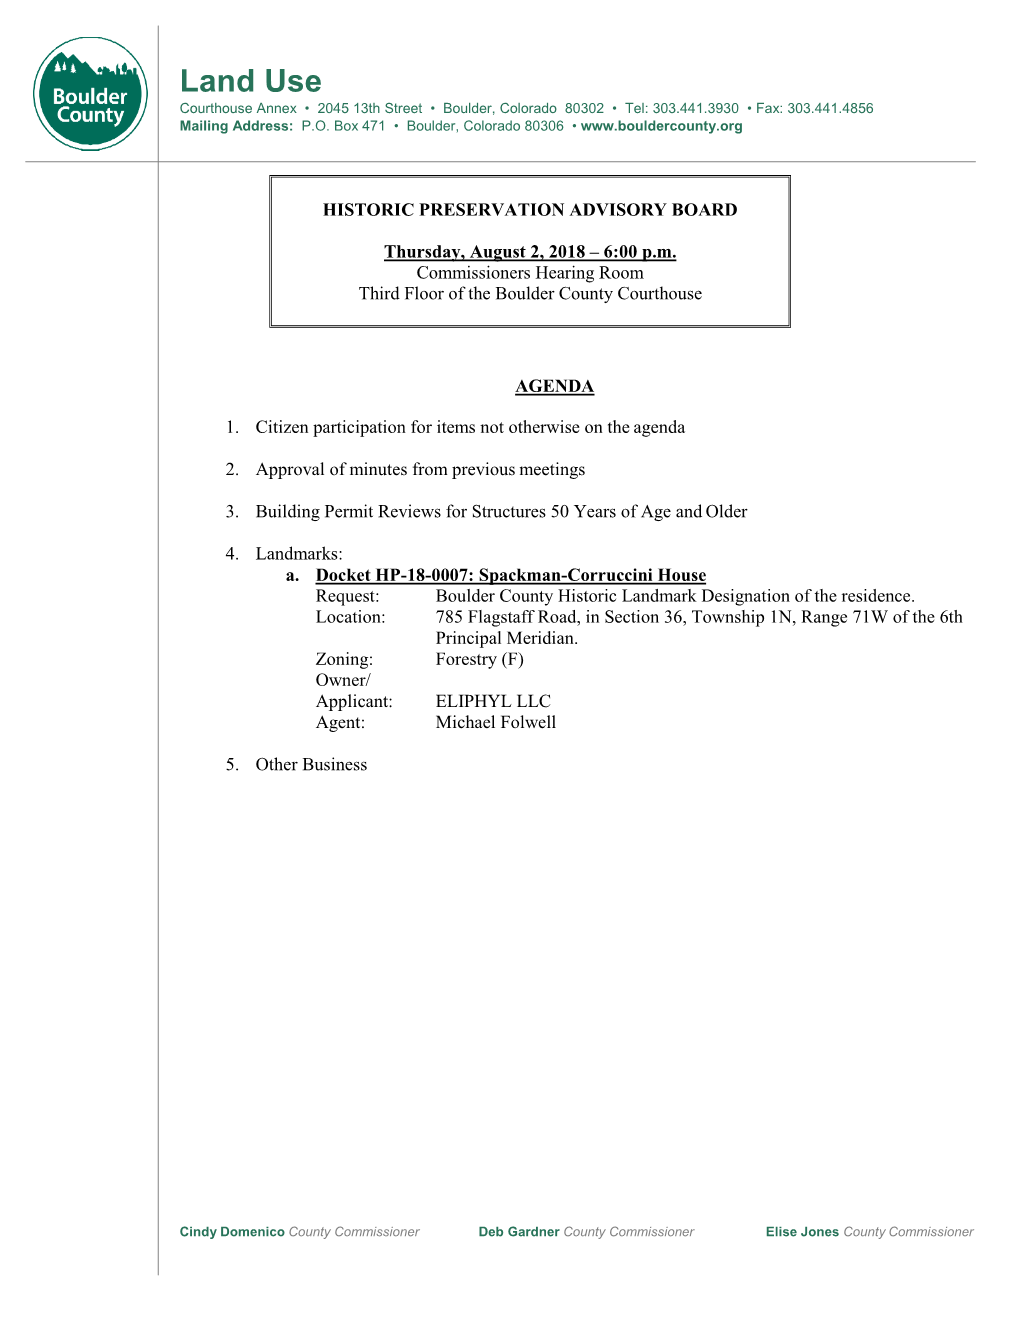 Historic Preservation Advisory Board Agenda and Packet, August 2, 2018